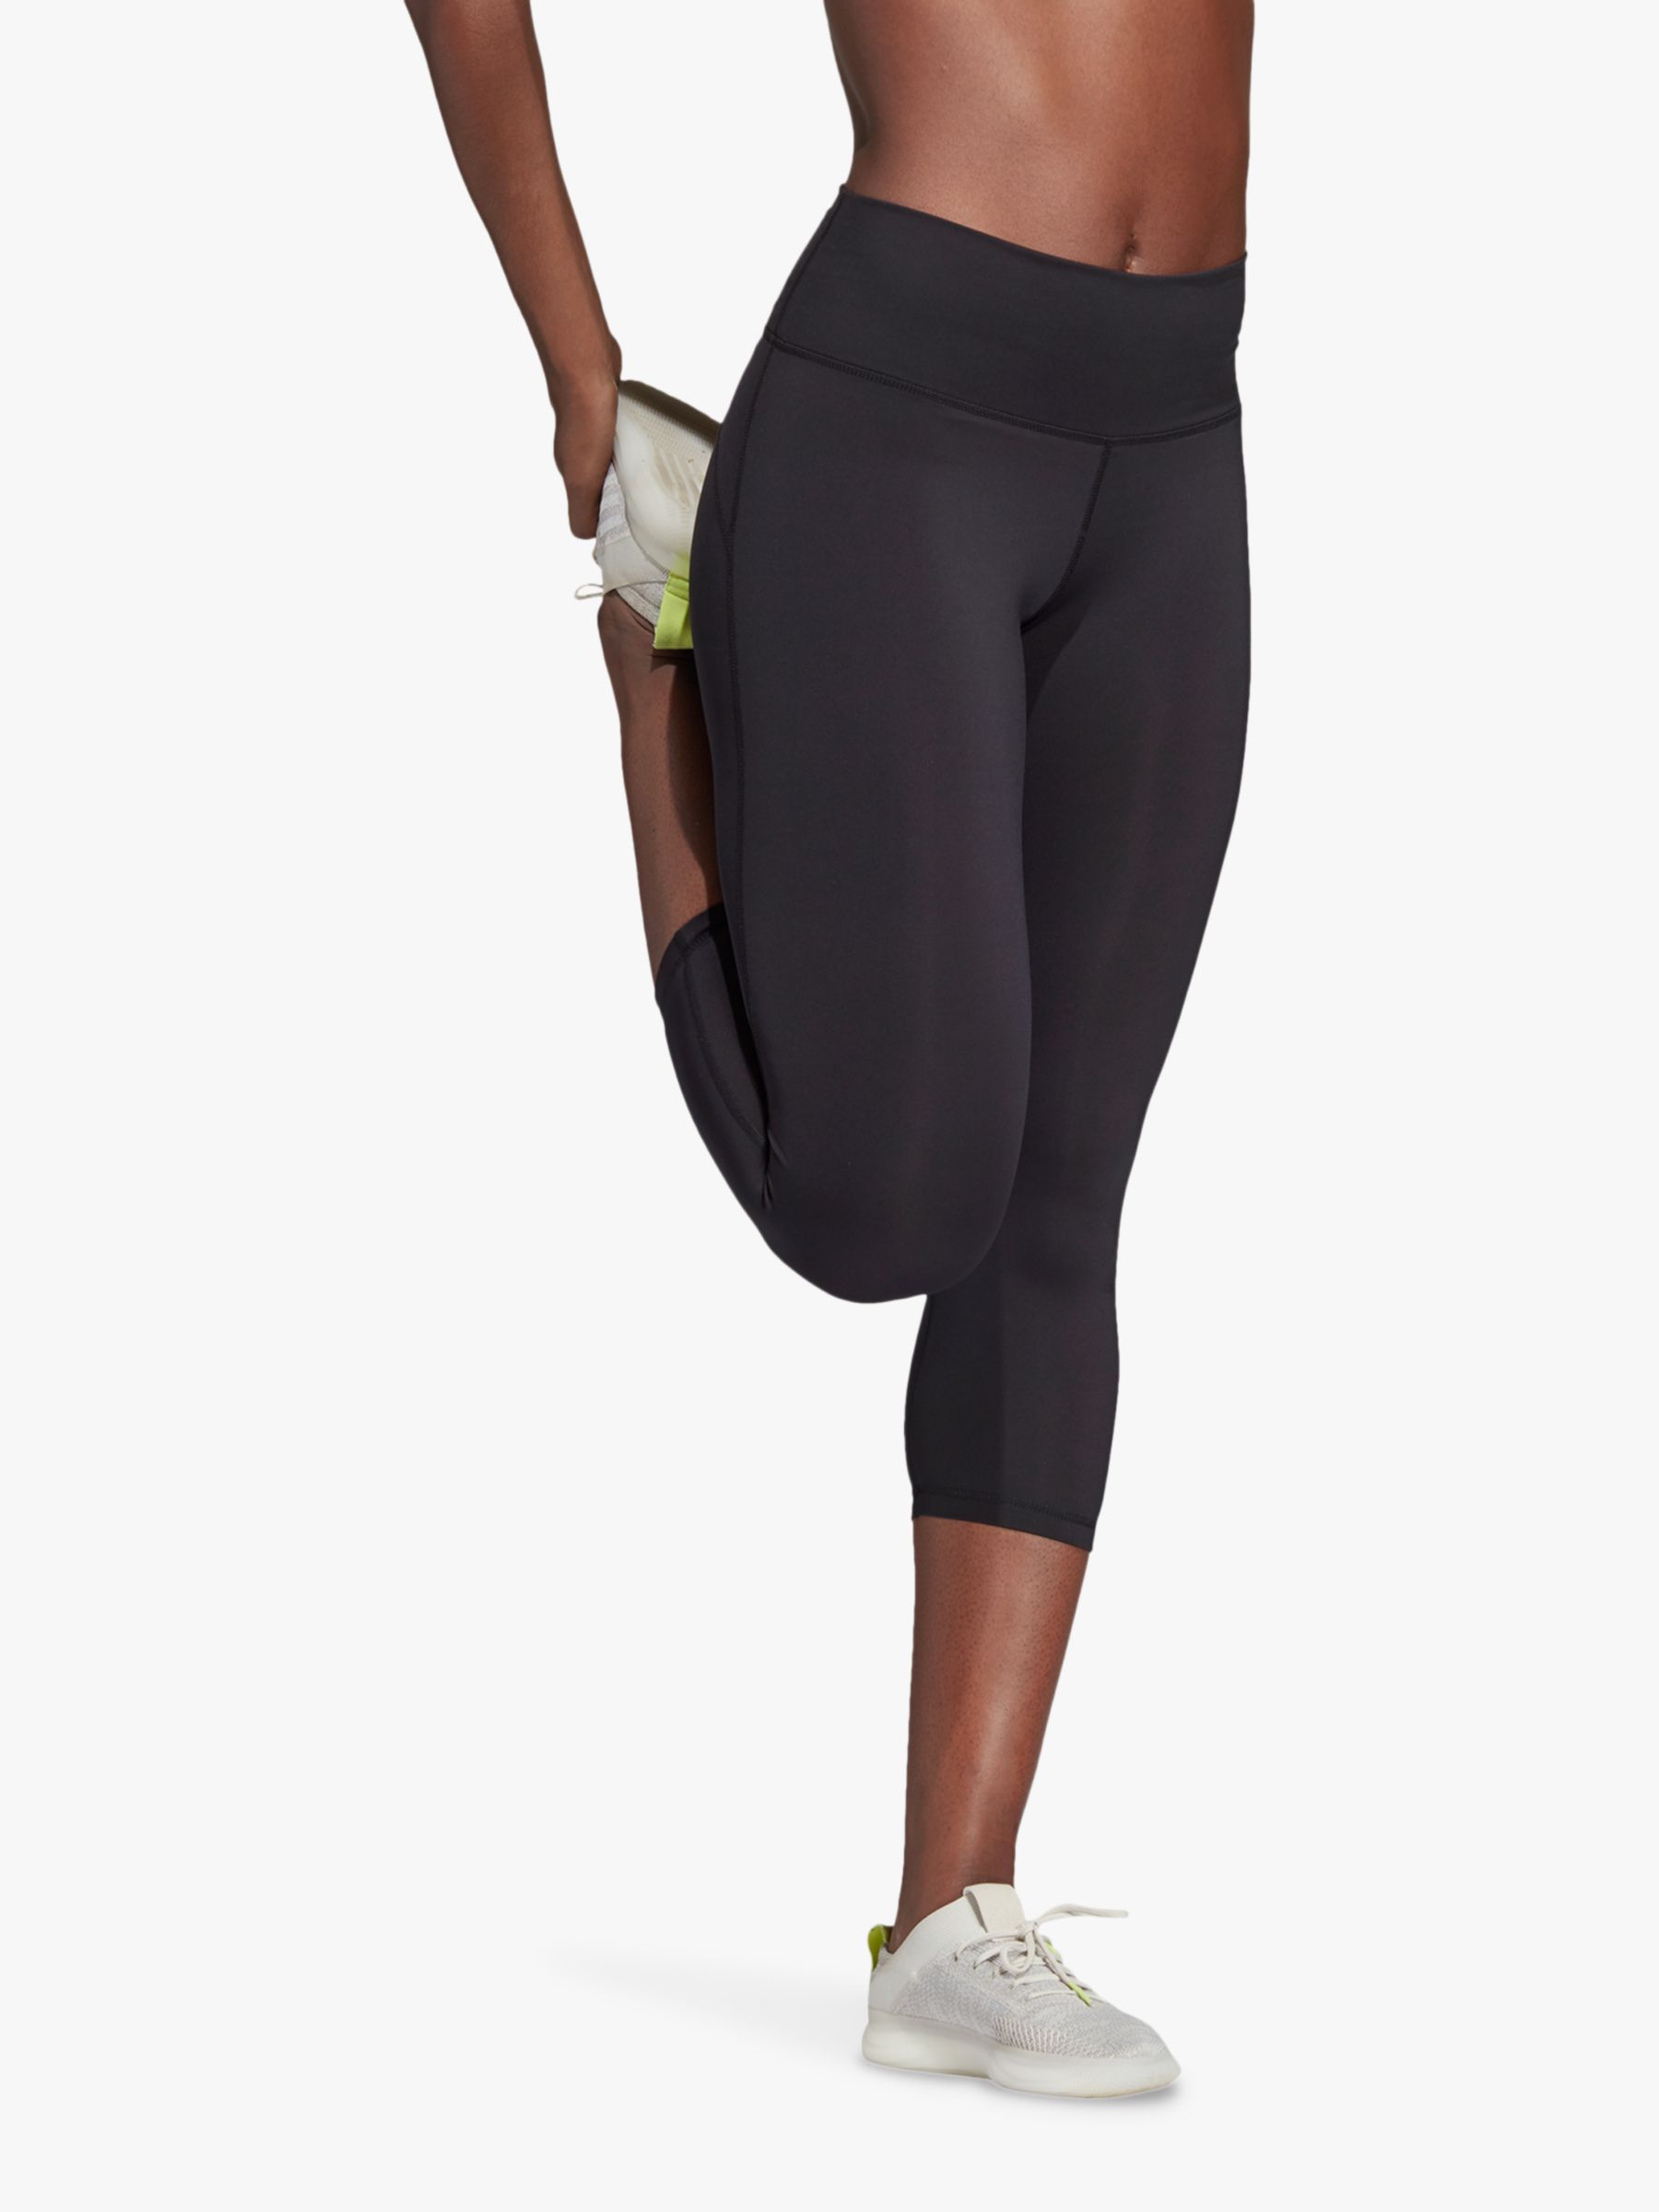 adidas believe this high rise tights